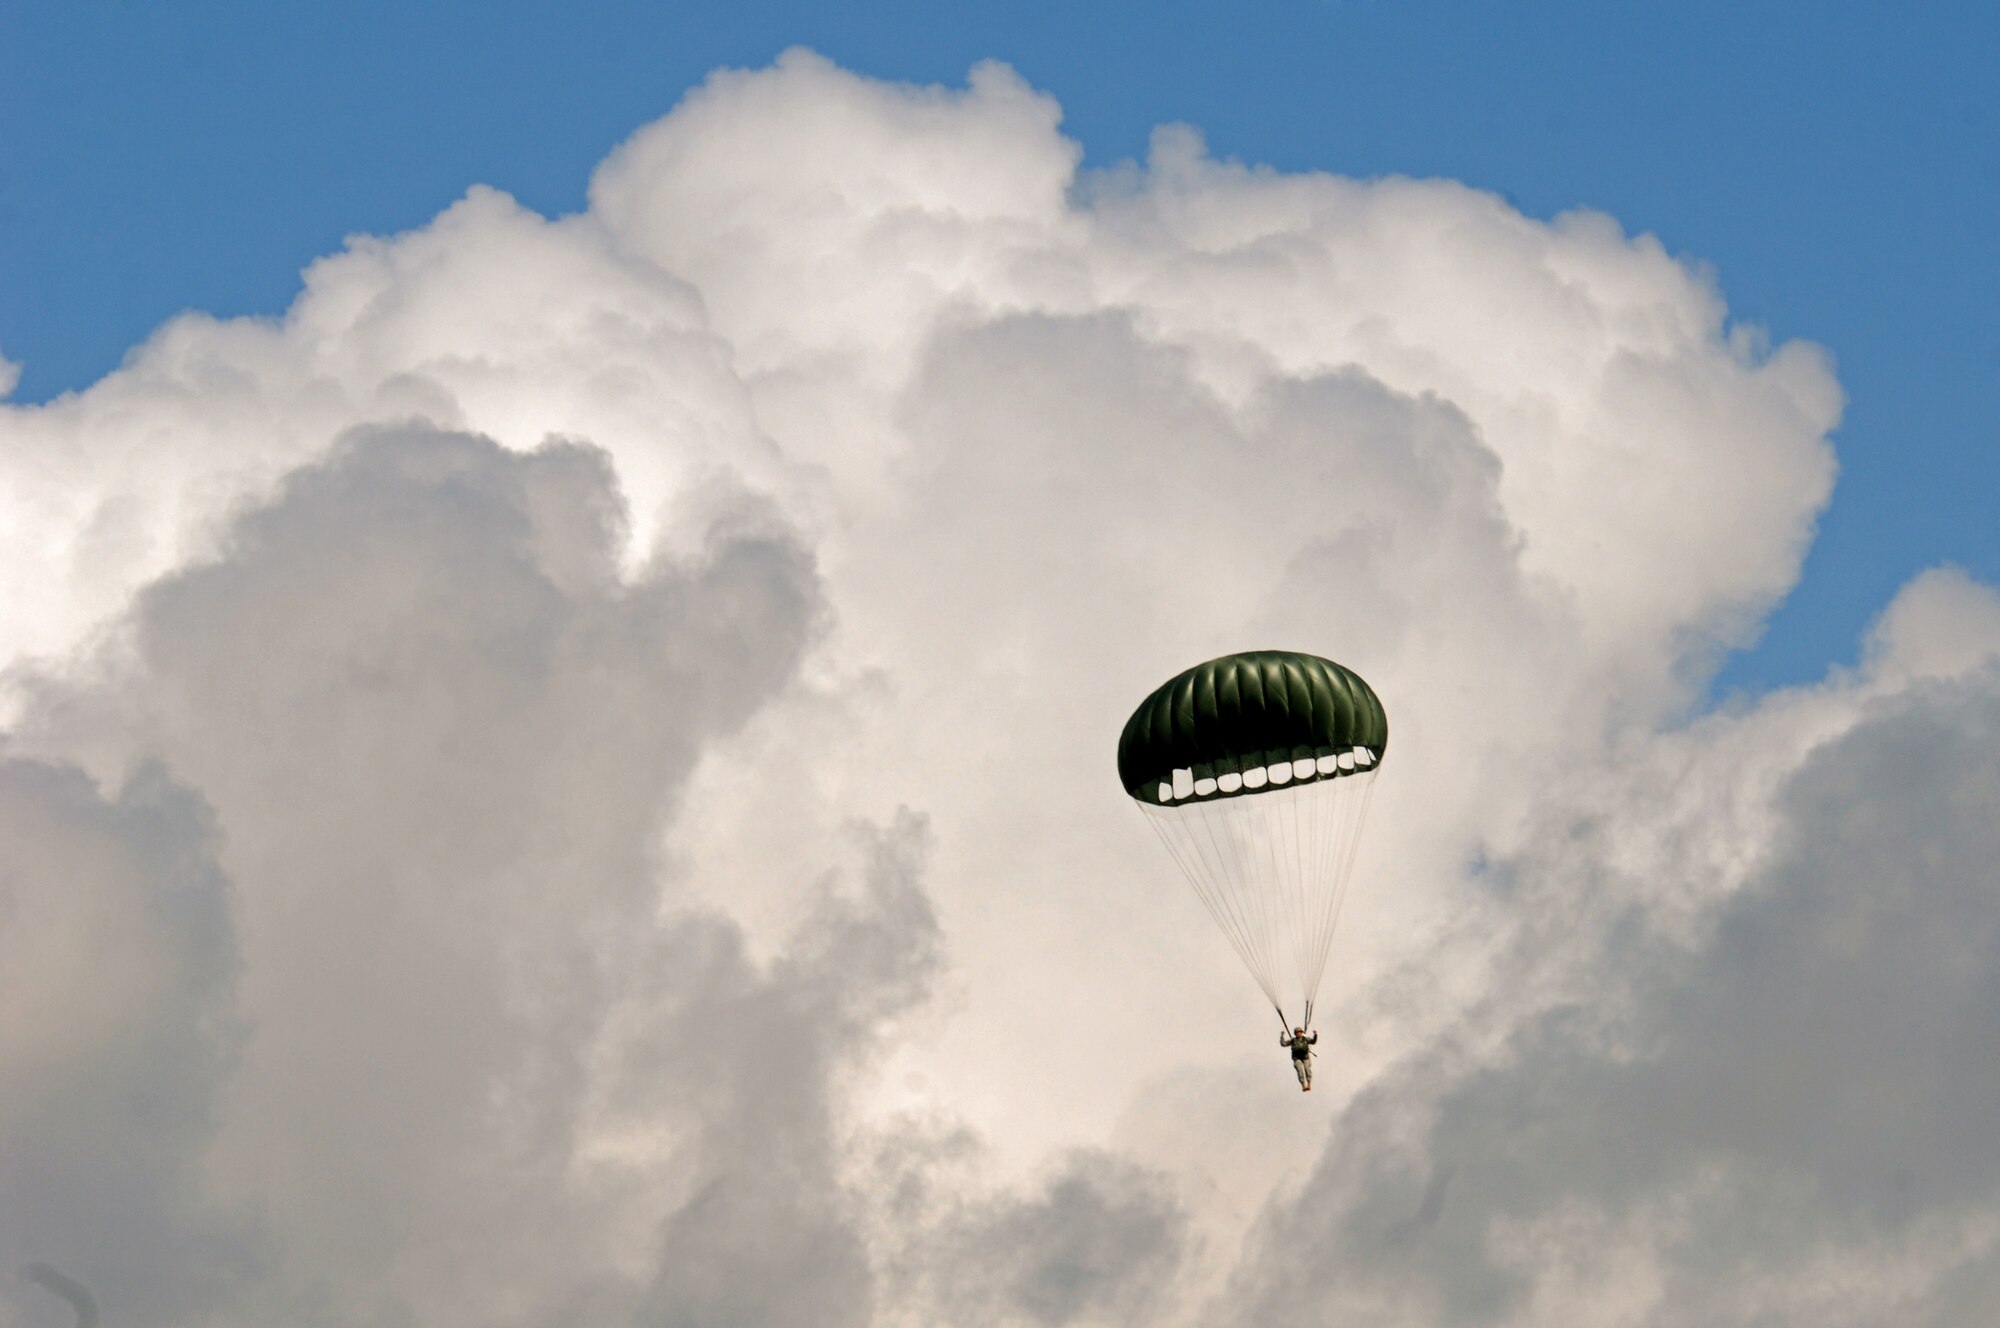 United States Air Force Senior Master Sgt. John Storms, 786th Security Forces Squadron paratrooper, glides to the ground after jumping from a C-130 Hercules as a part of an airfield assessment team during an Operational Readiness Exercise, May 20, 2009, West Freugh Airfield, Scotland. (U.S. Air Force photo by Senior Airman Kenny Holston)